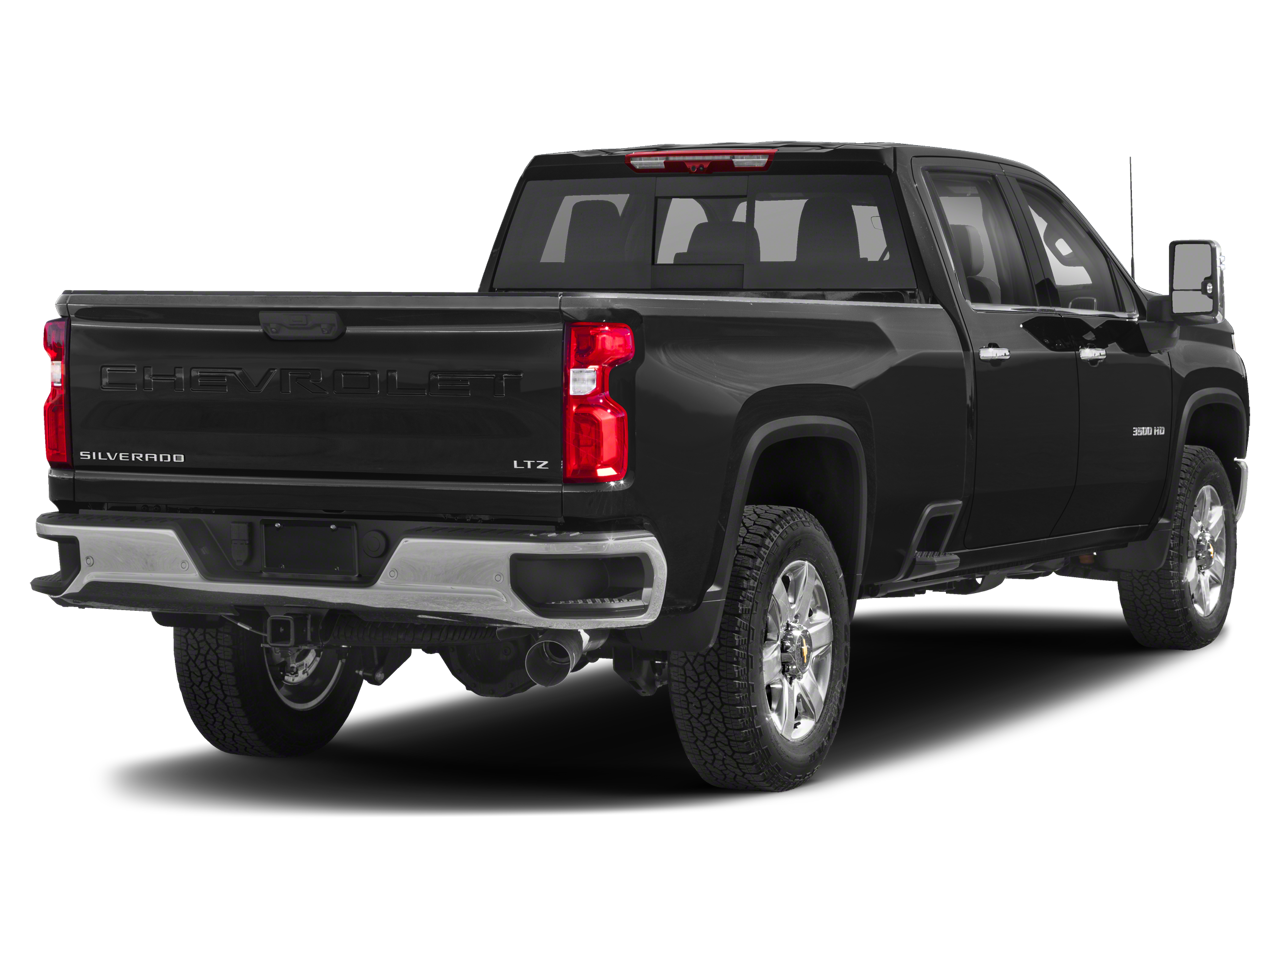 Used 2020 Chevrolet Silverado 3500HD LTZ with VIN 1GC4YUEY0LF129504 for sale in Lakeville, Minnesota